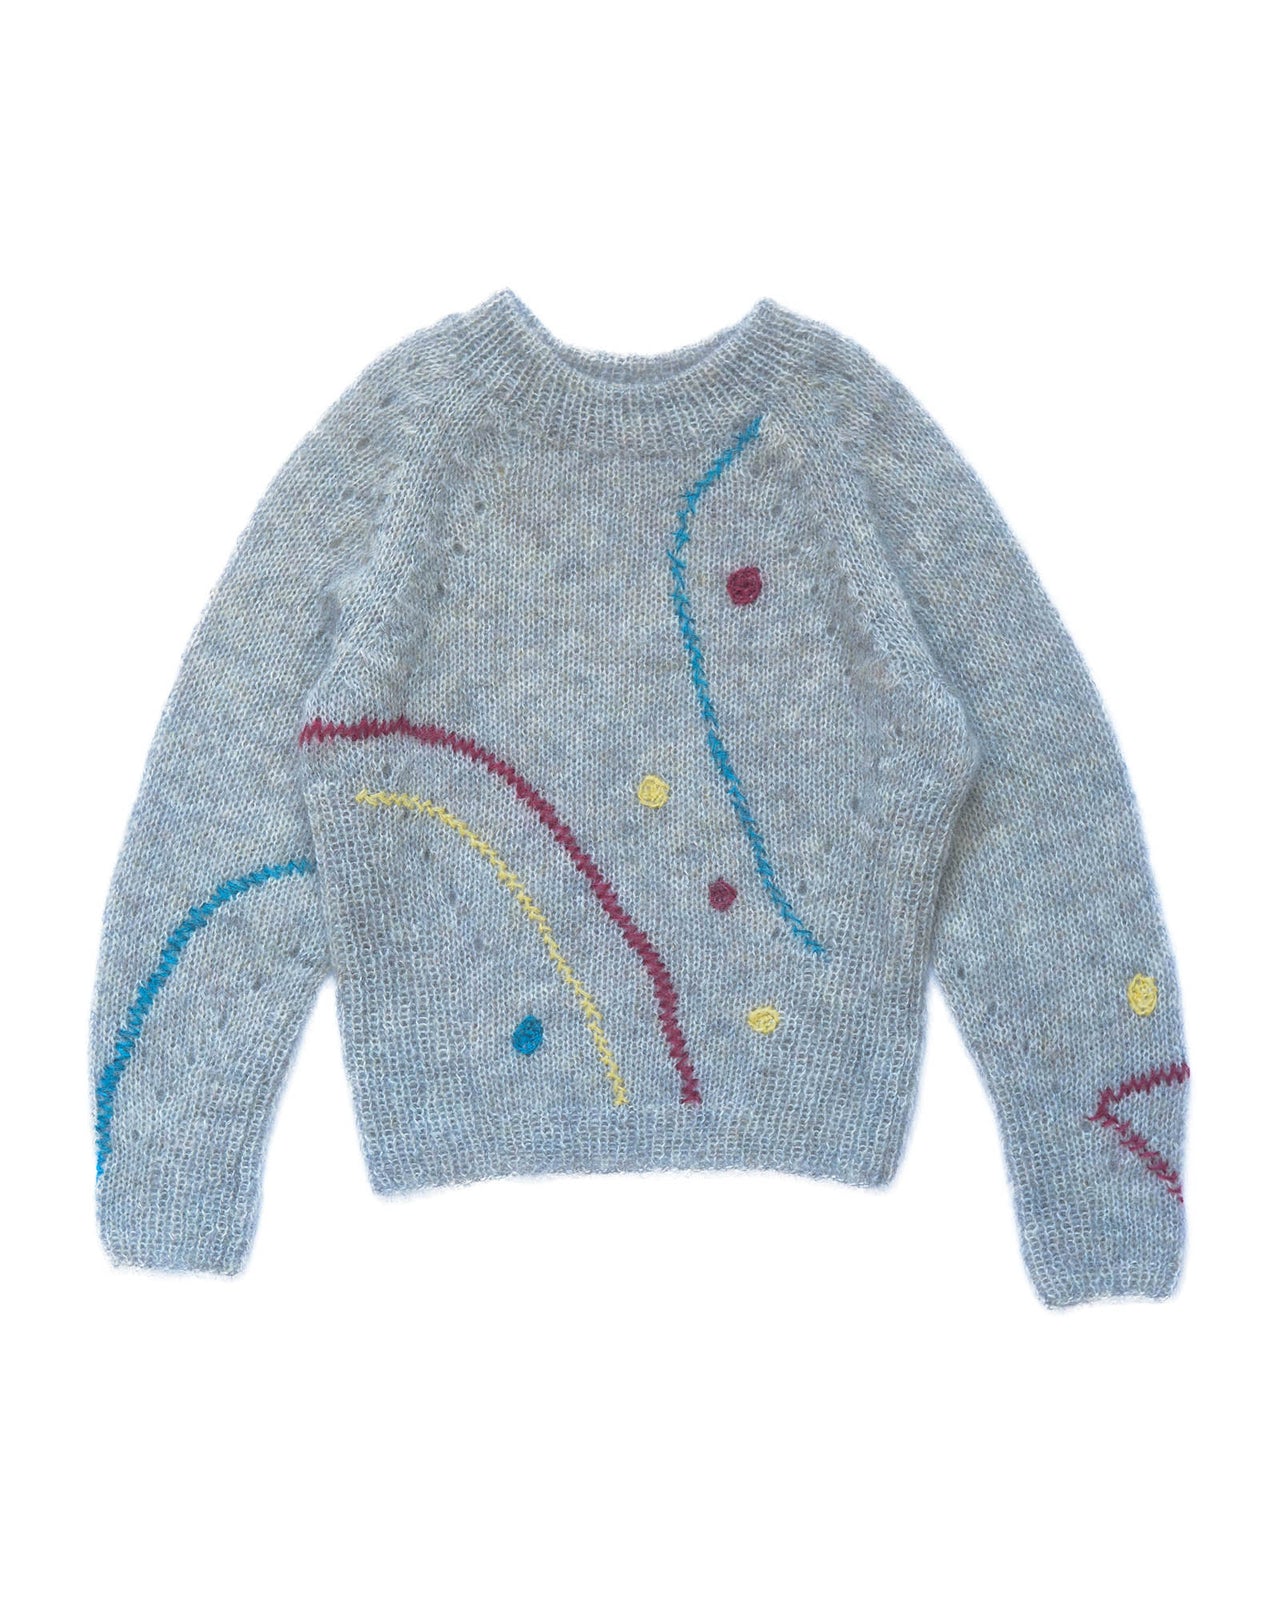 Grey mohair sweater laid flat on white background. The sweater has a few colourful embroidered lines and dots over it. 